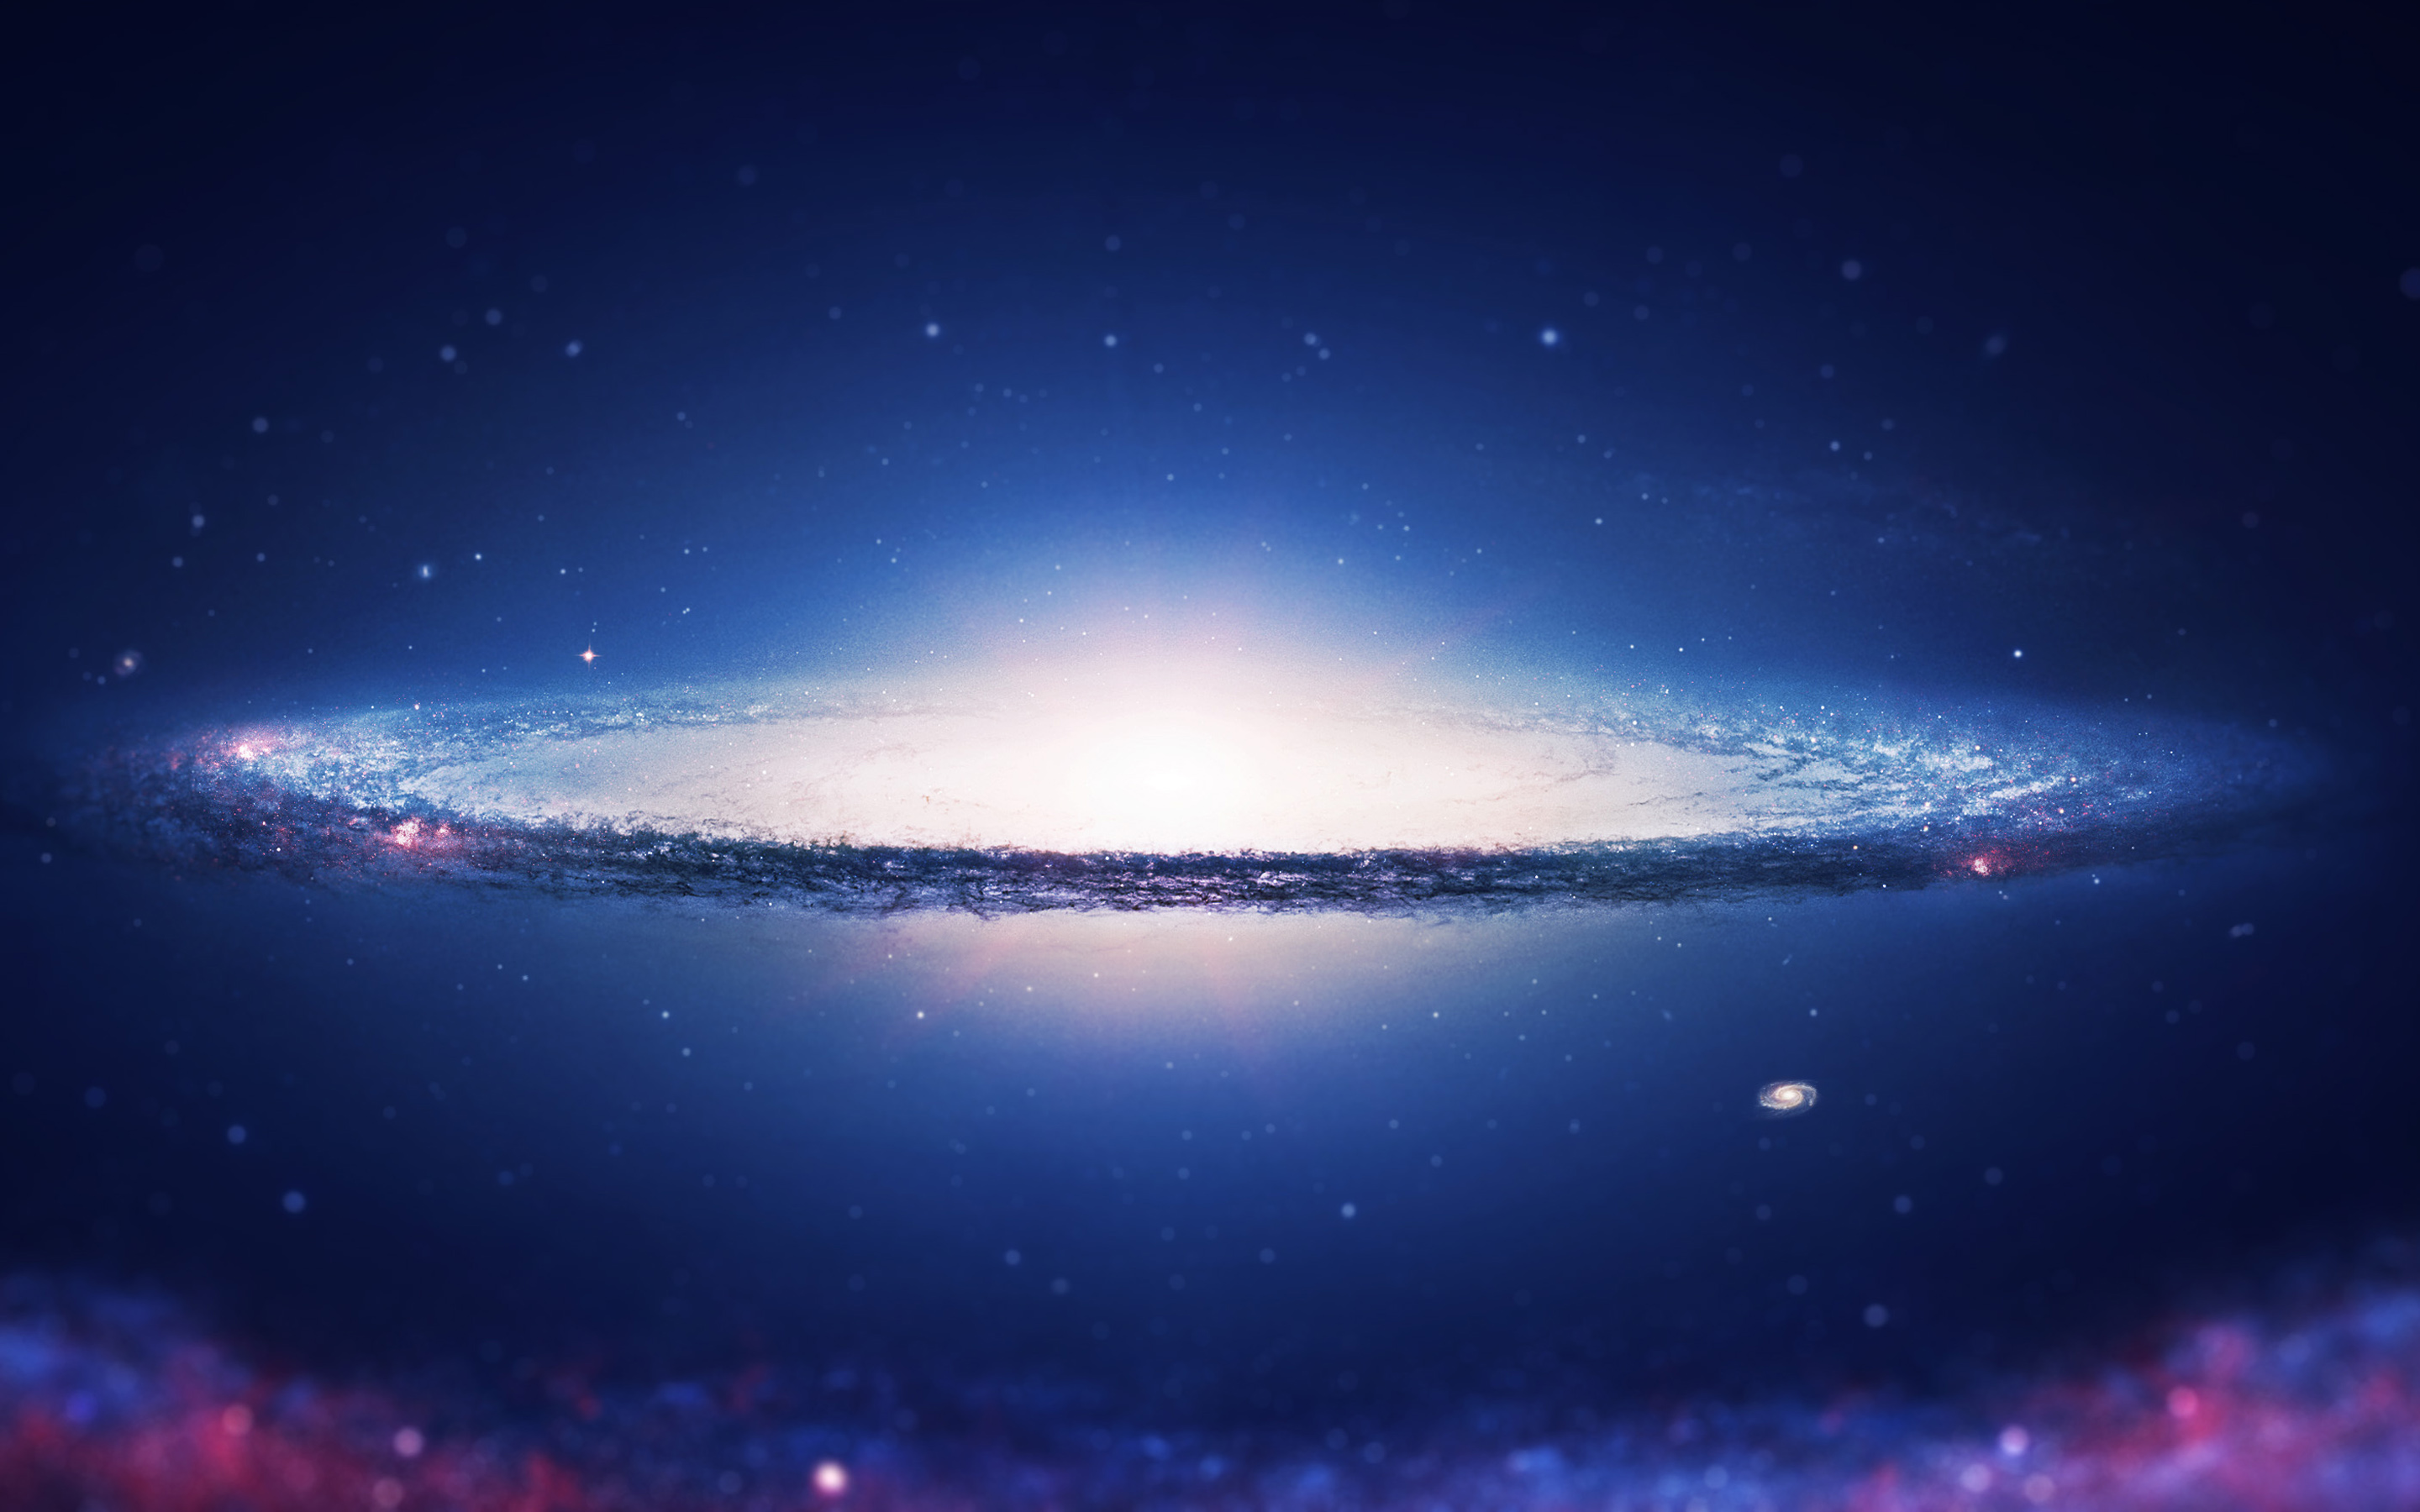 Galaxy Background Pictures For Wallpaper